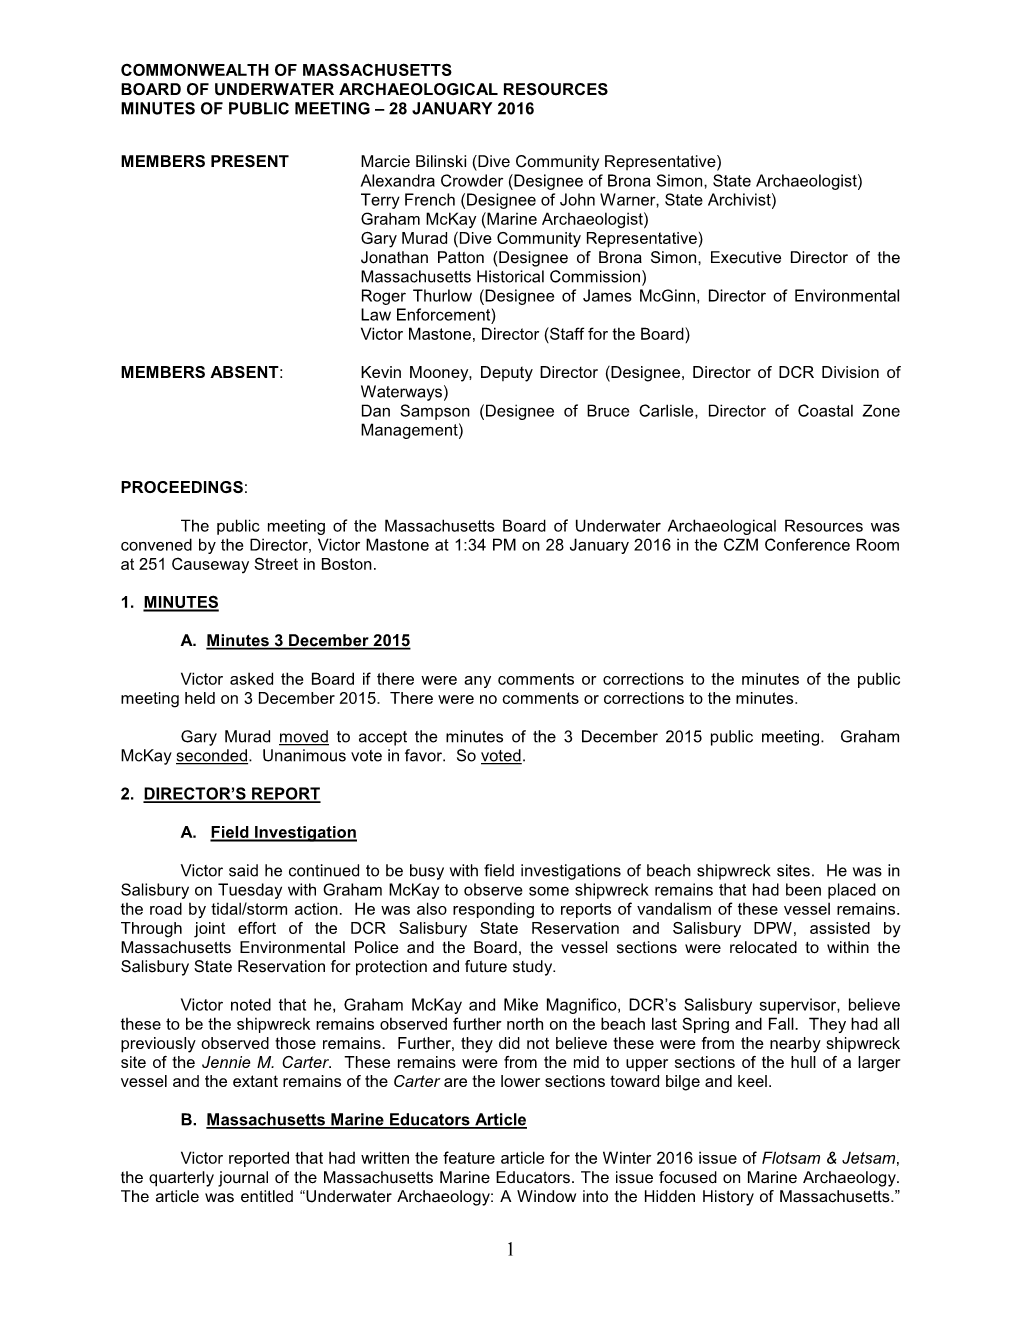 Commonwealth of Massachusetts Board of Underwater Archaeological Resources Minutes of Public Meeting – 28 January 2016